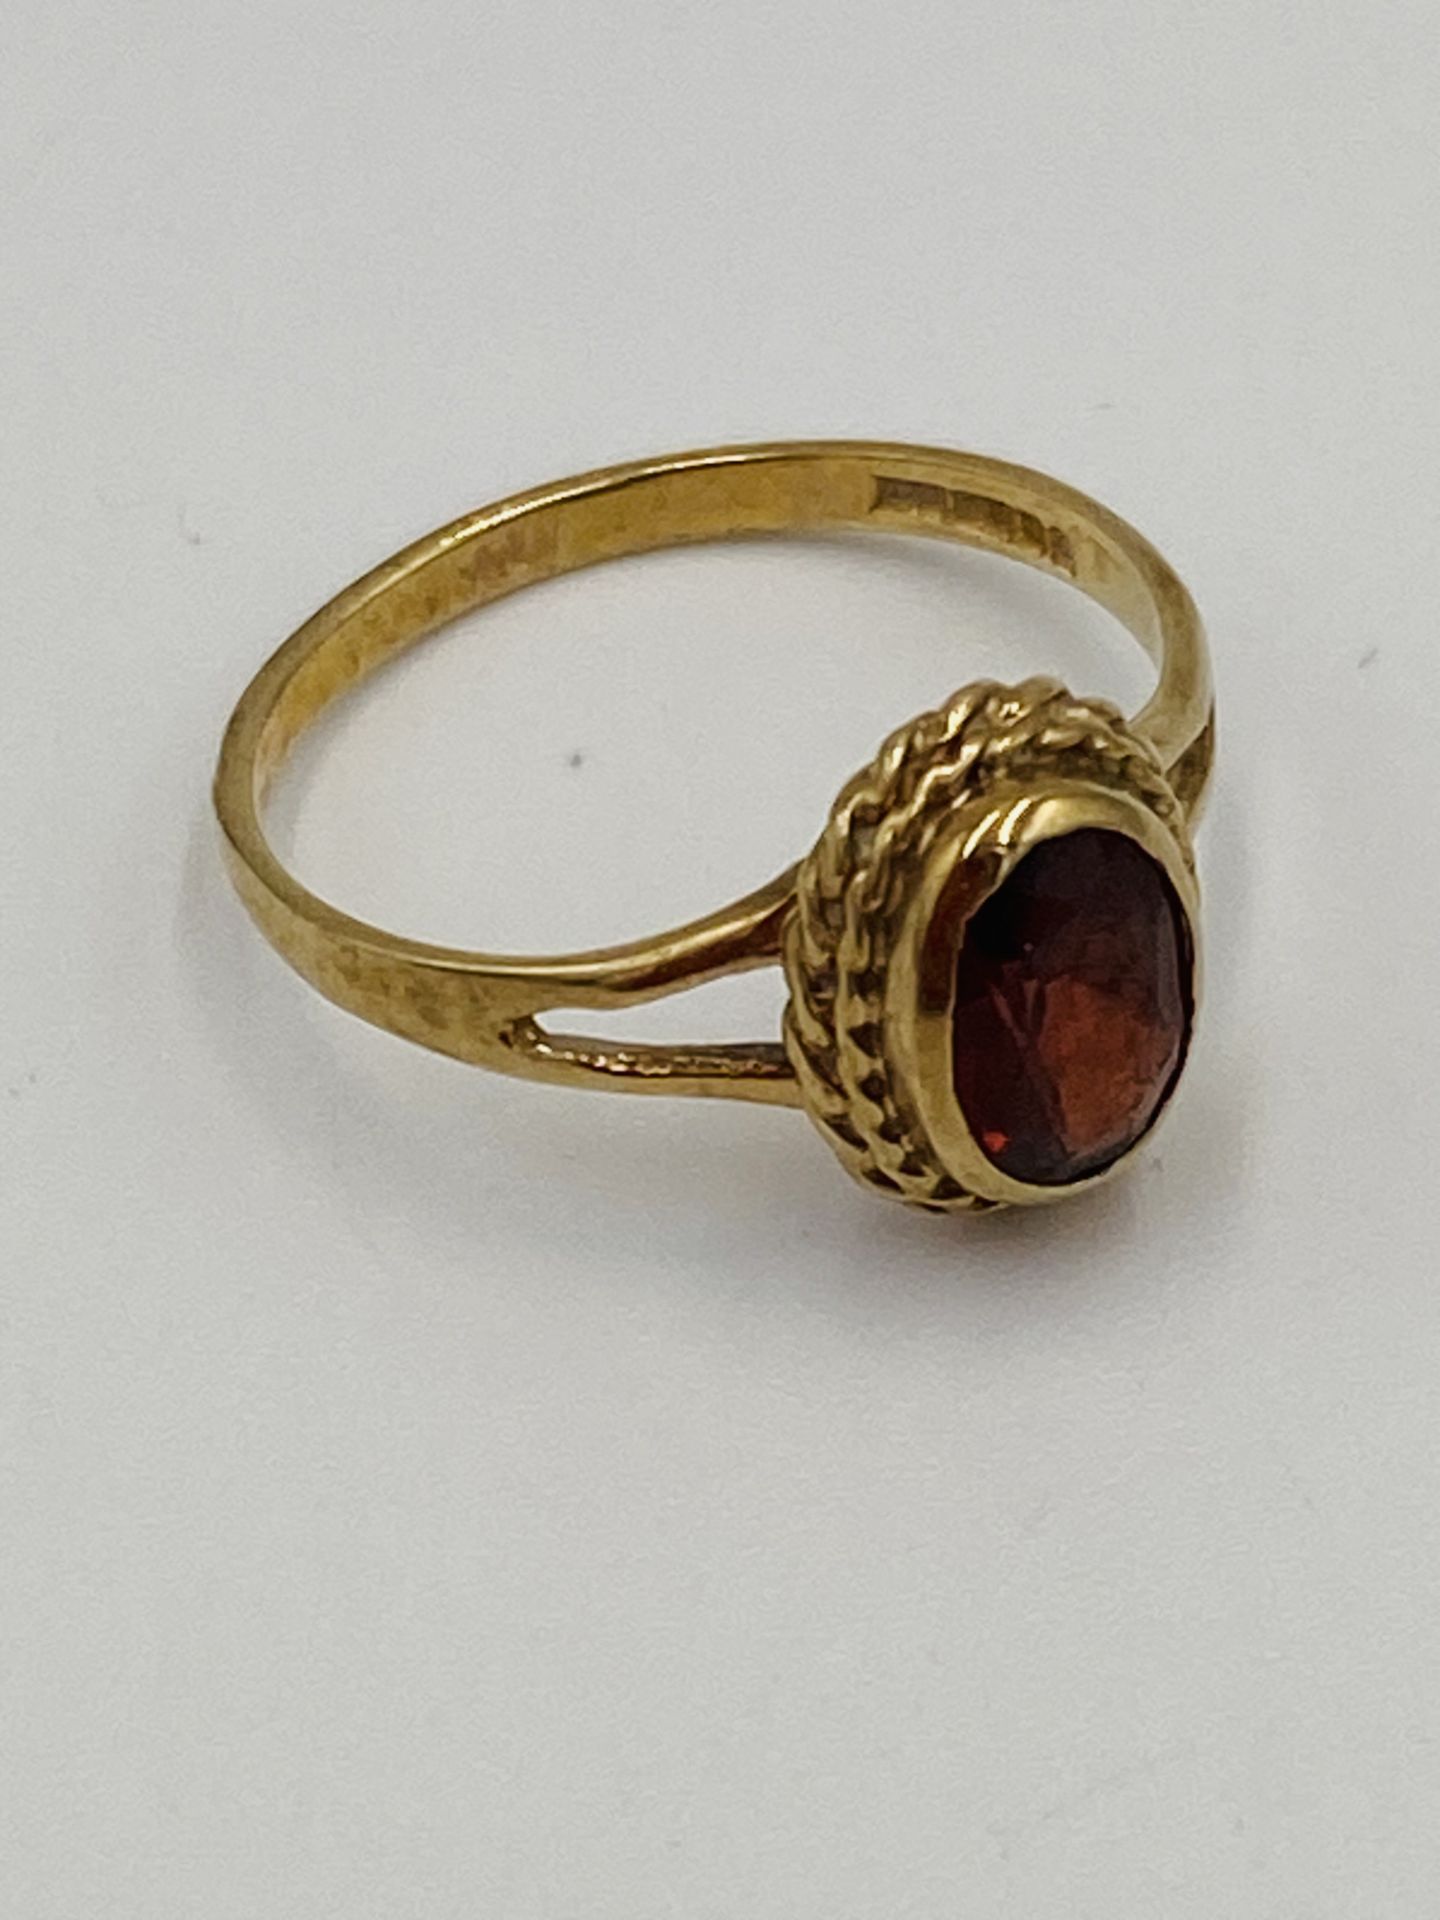 9ct gold ring set with a red stone - Image 3 of 5